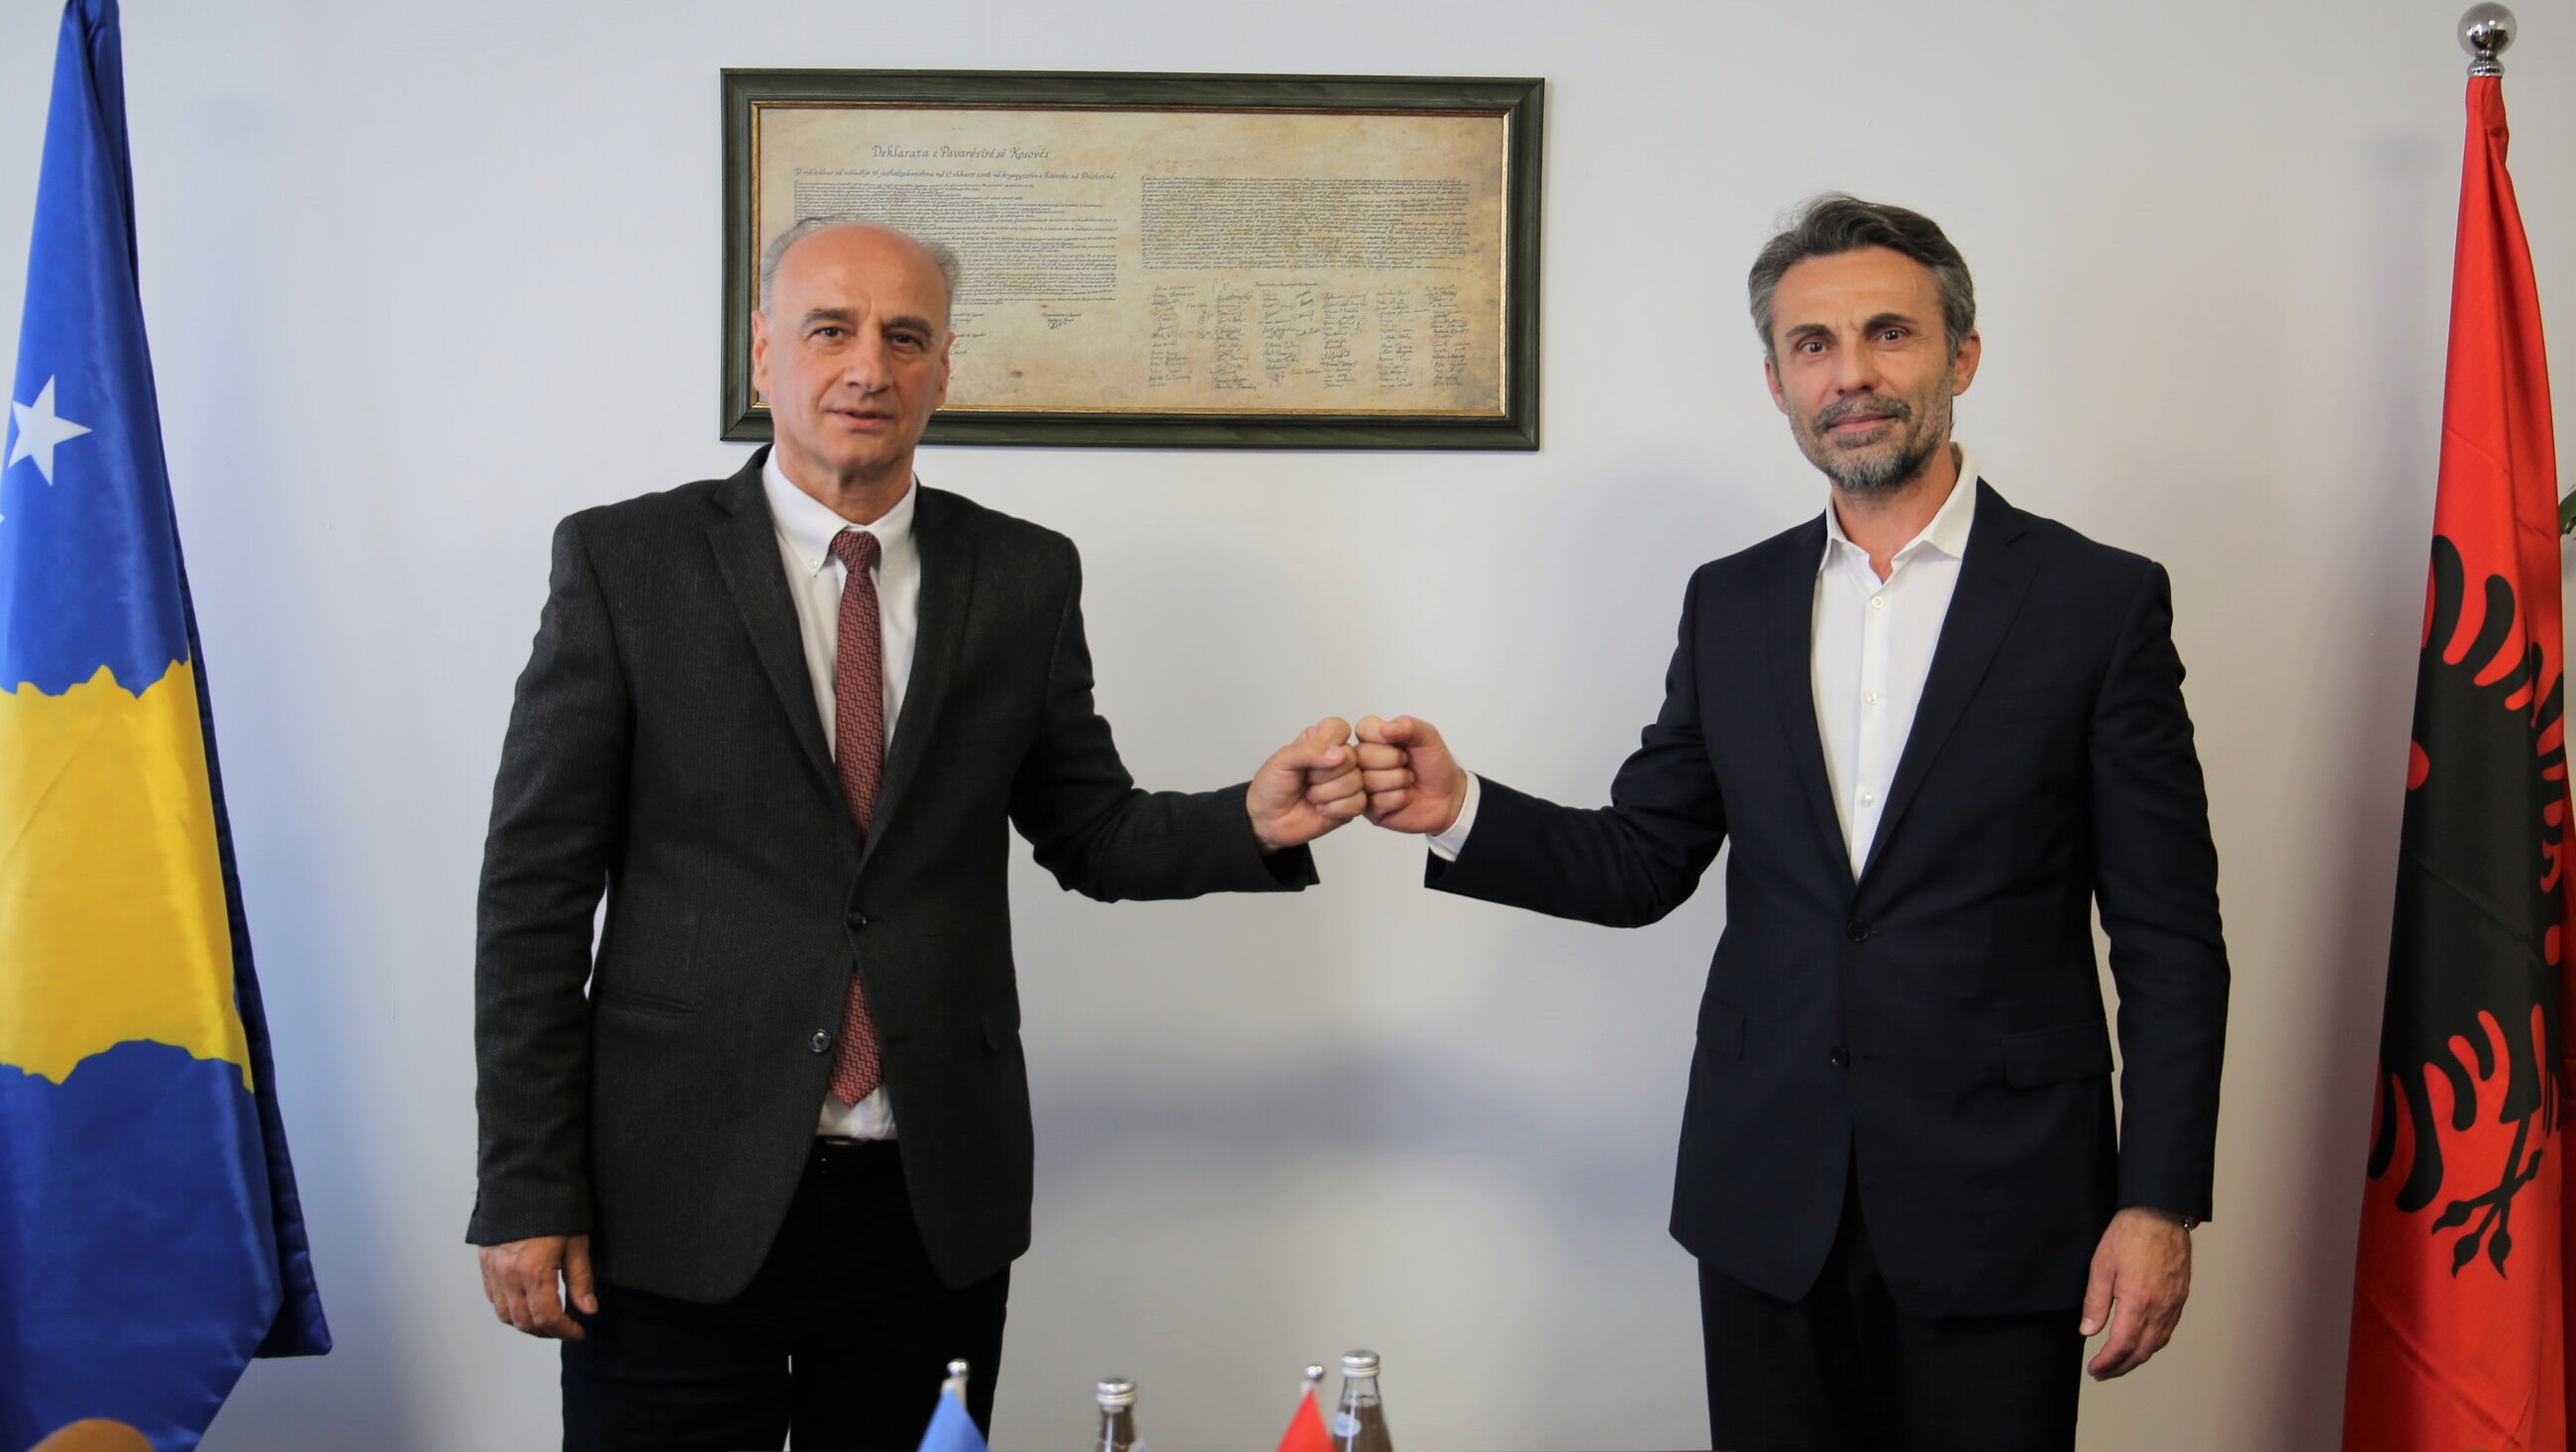 The Chairman of the Kosovo Prosecutorial Council, Jetish Maloku, met with the Chairman of the High Prosecution Council of Albania, Gent Ibrahimi